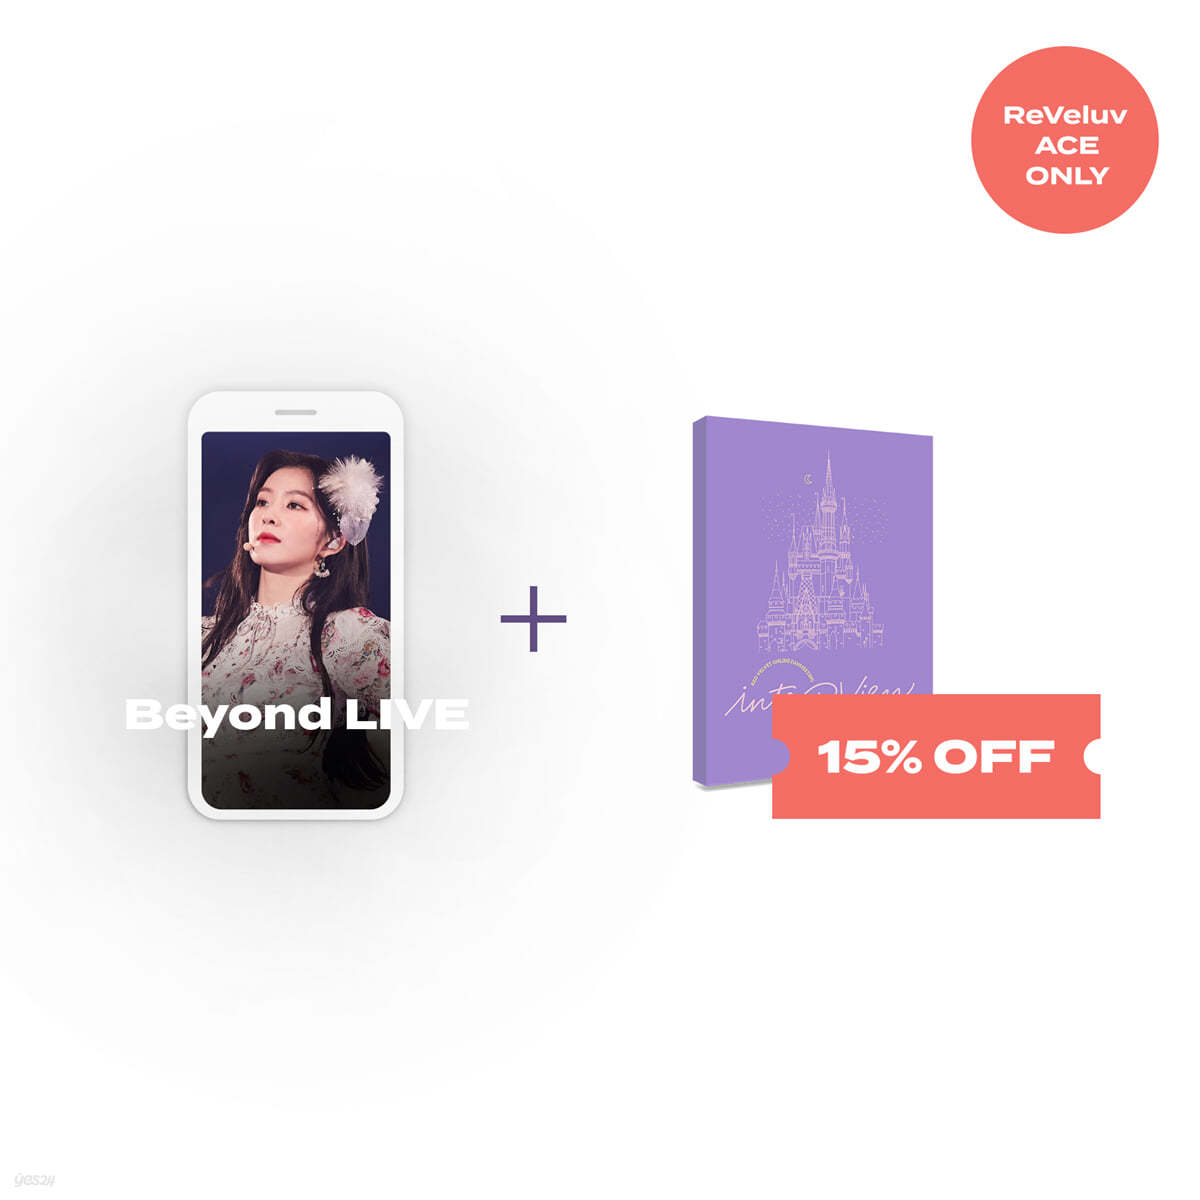 [ReVeluv ACE ONLY] Beyond LIVE 관람권 + POSTCARD BOOK Beyond LIVE - Red Velvet Online Fanmeeting - inteRView vol.7 : Queendom